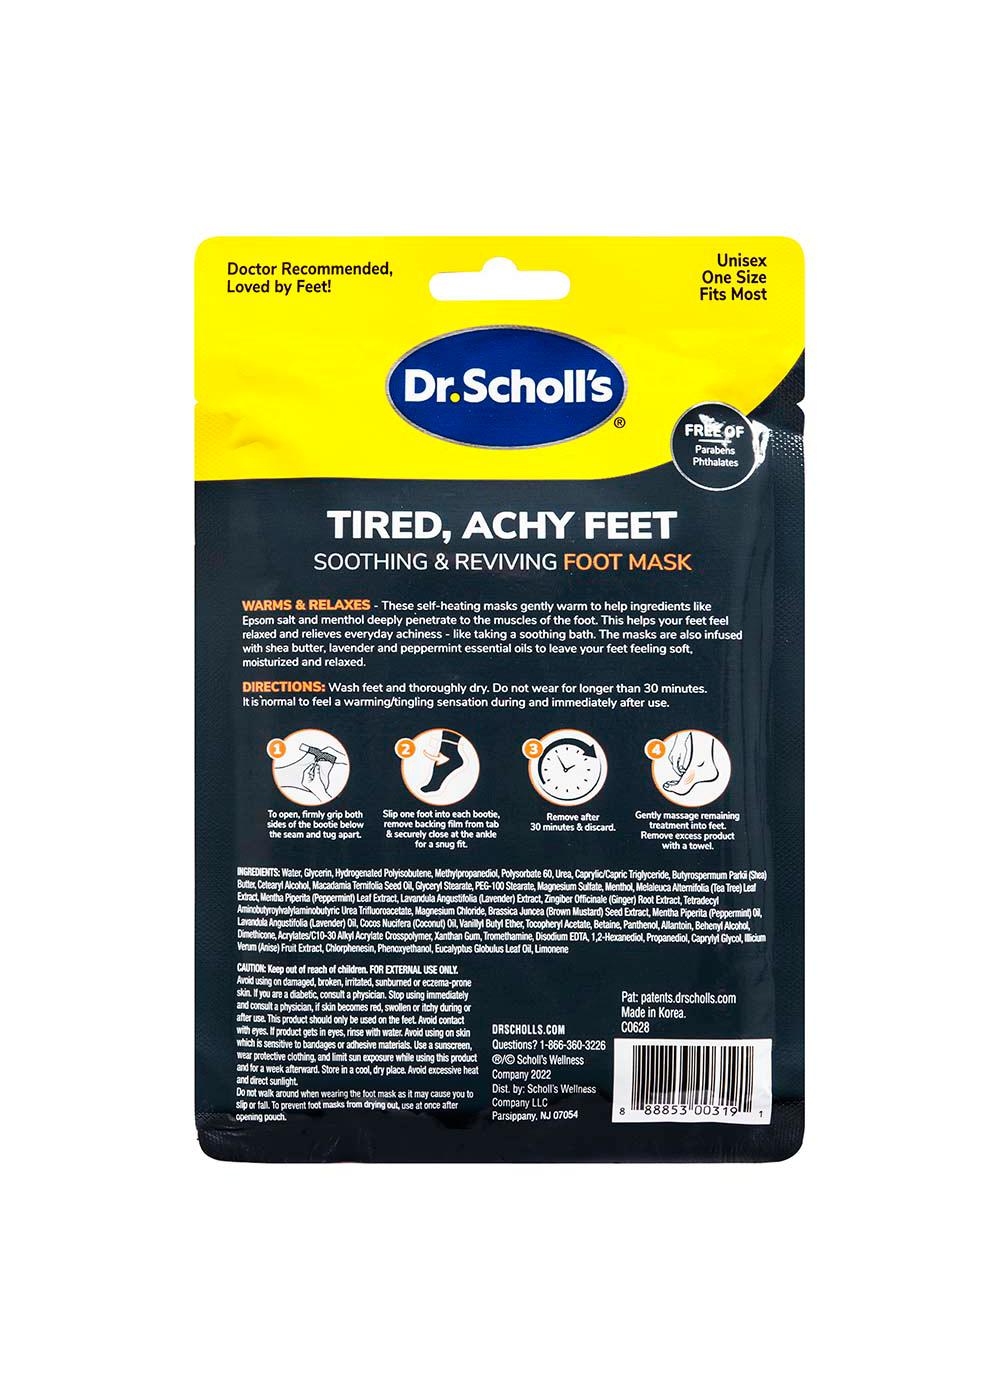 Dr. Scholl's Tired Achy Feet Soothing & Reviving Foot Mask; image 2 of 2